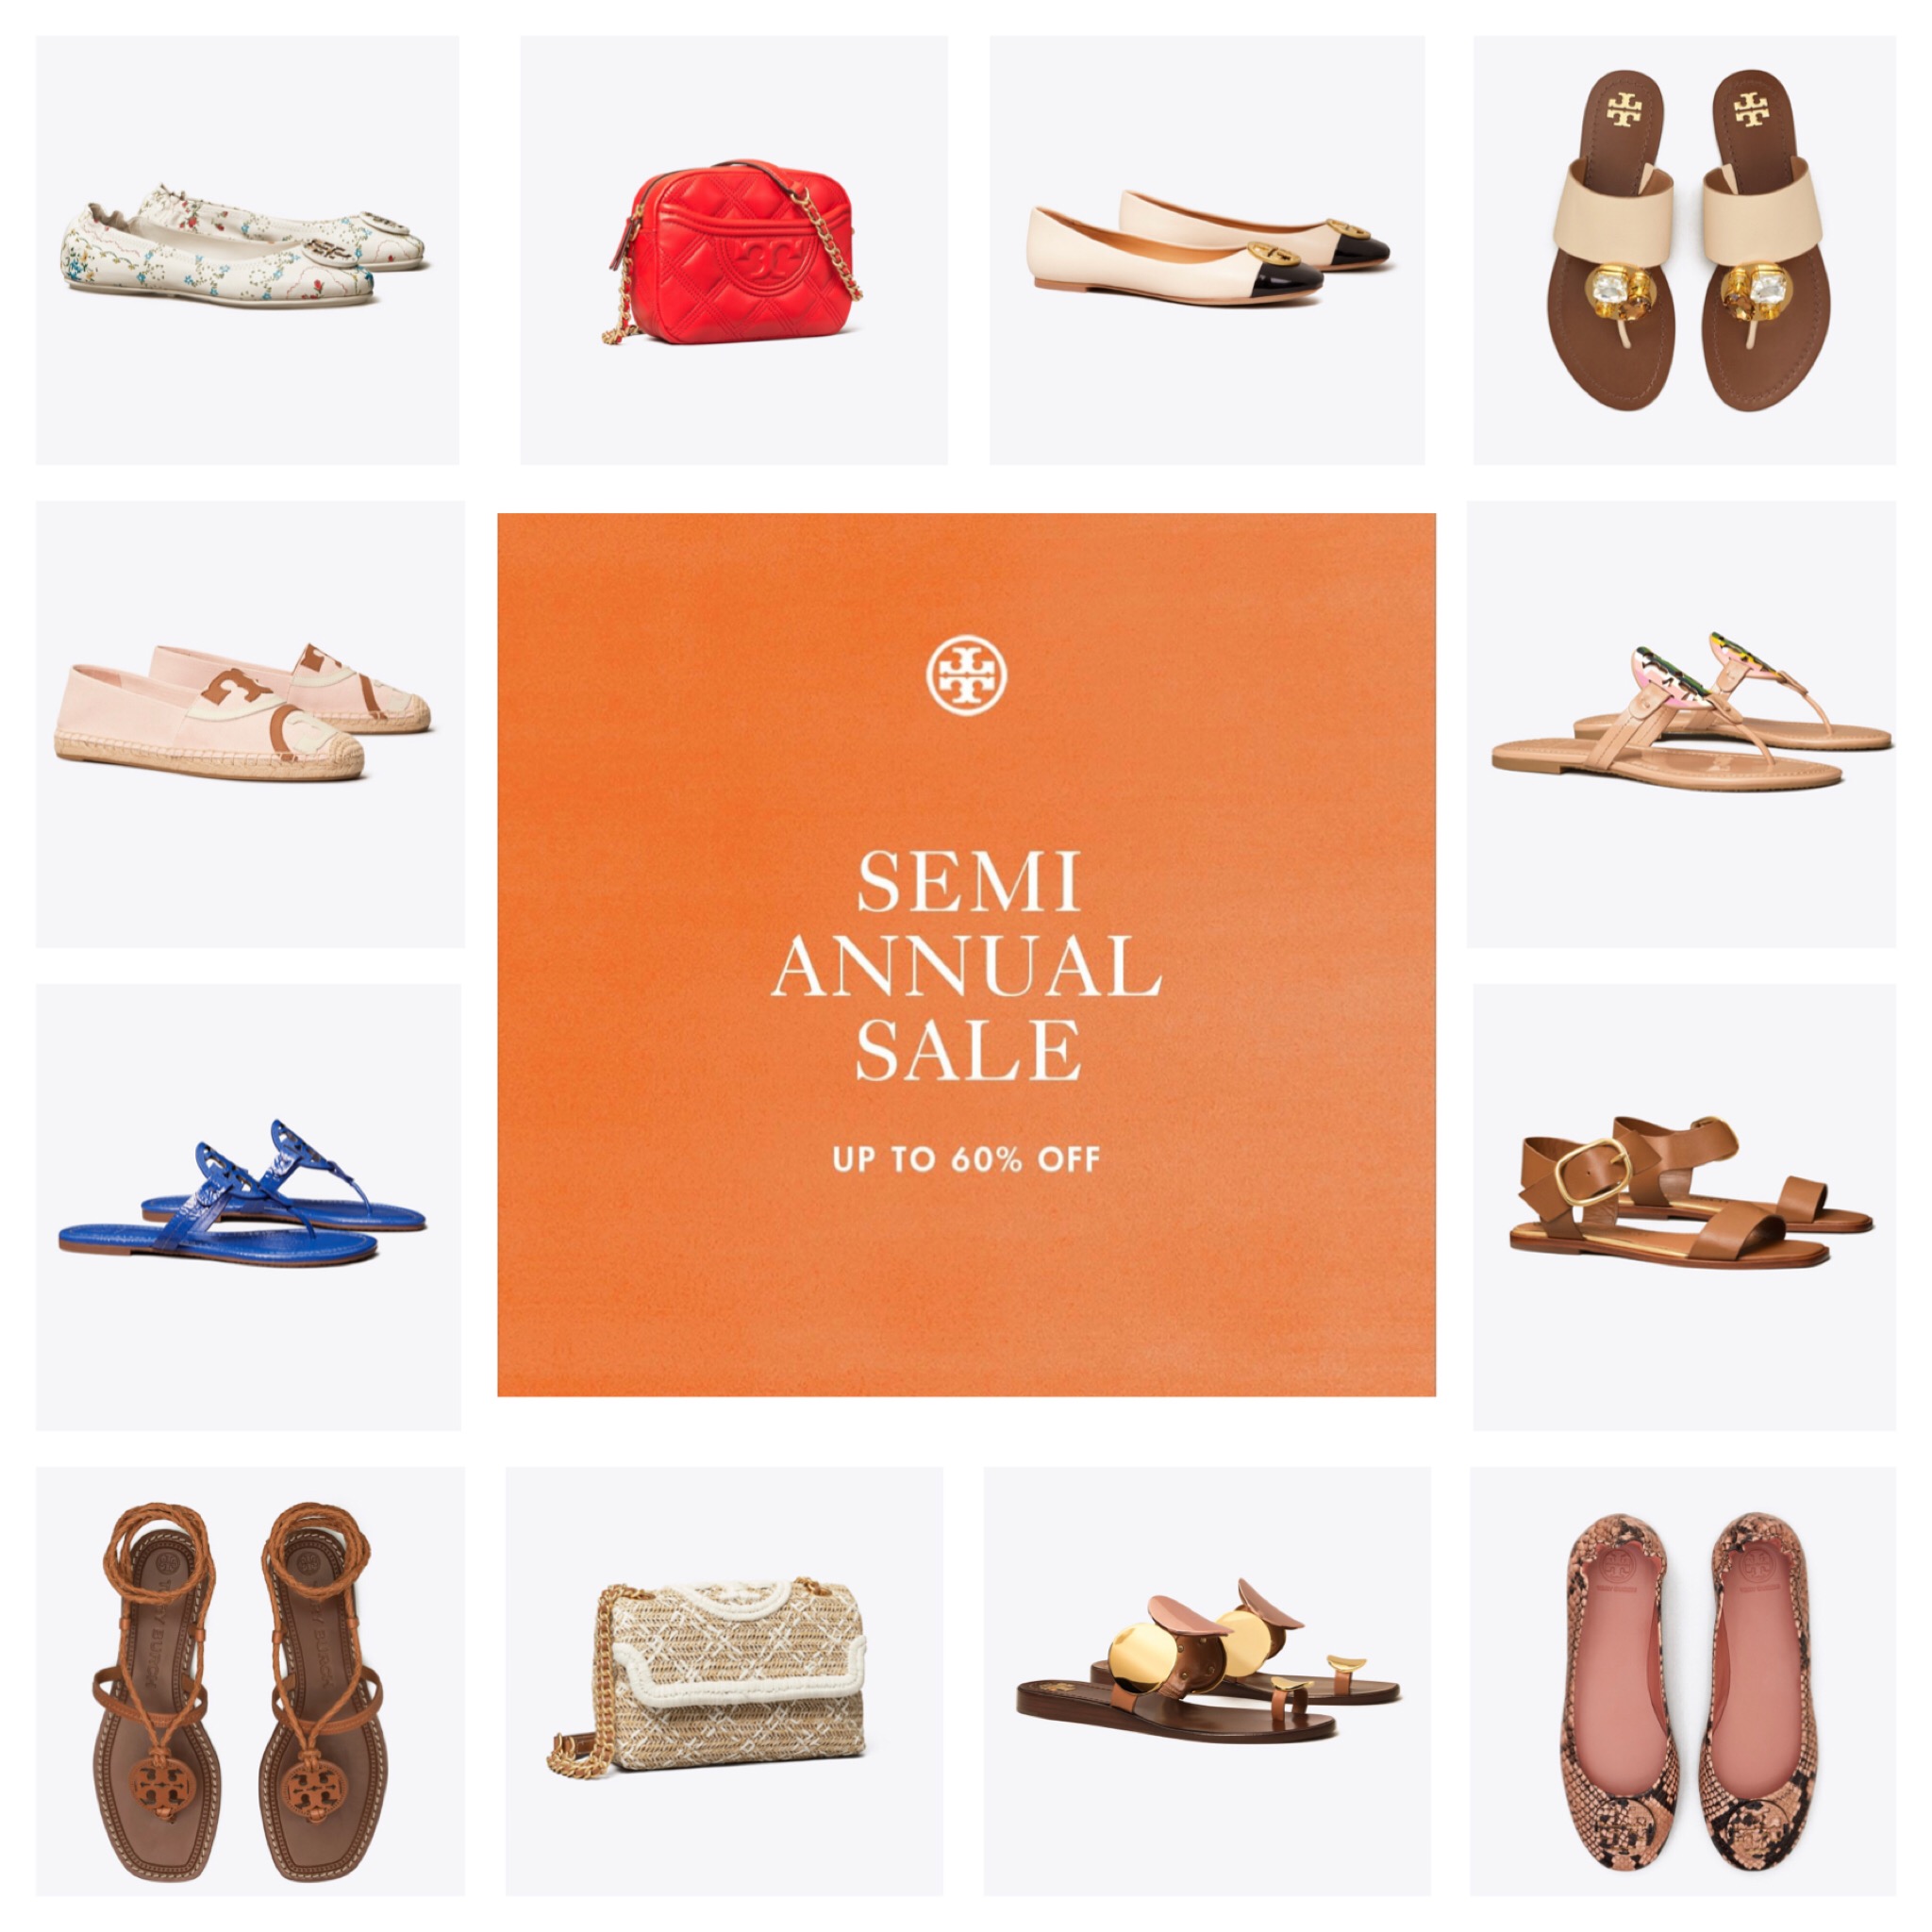 My Picks From The Tory Burch Semi-Annual Sale